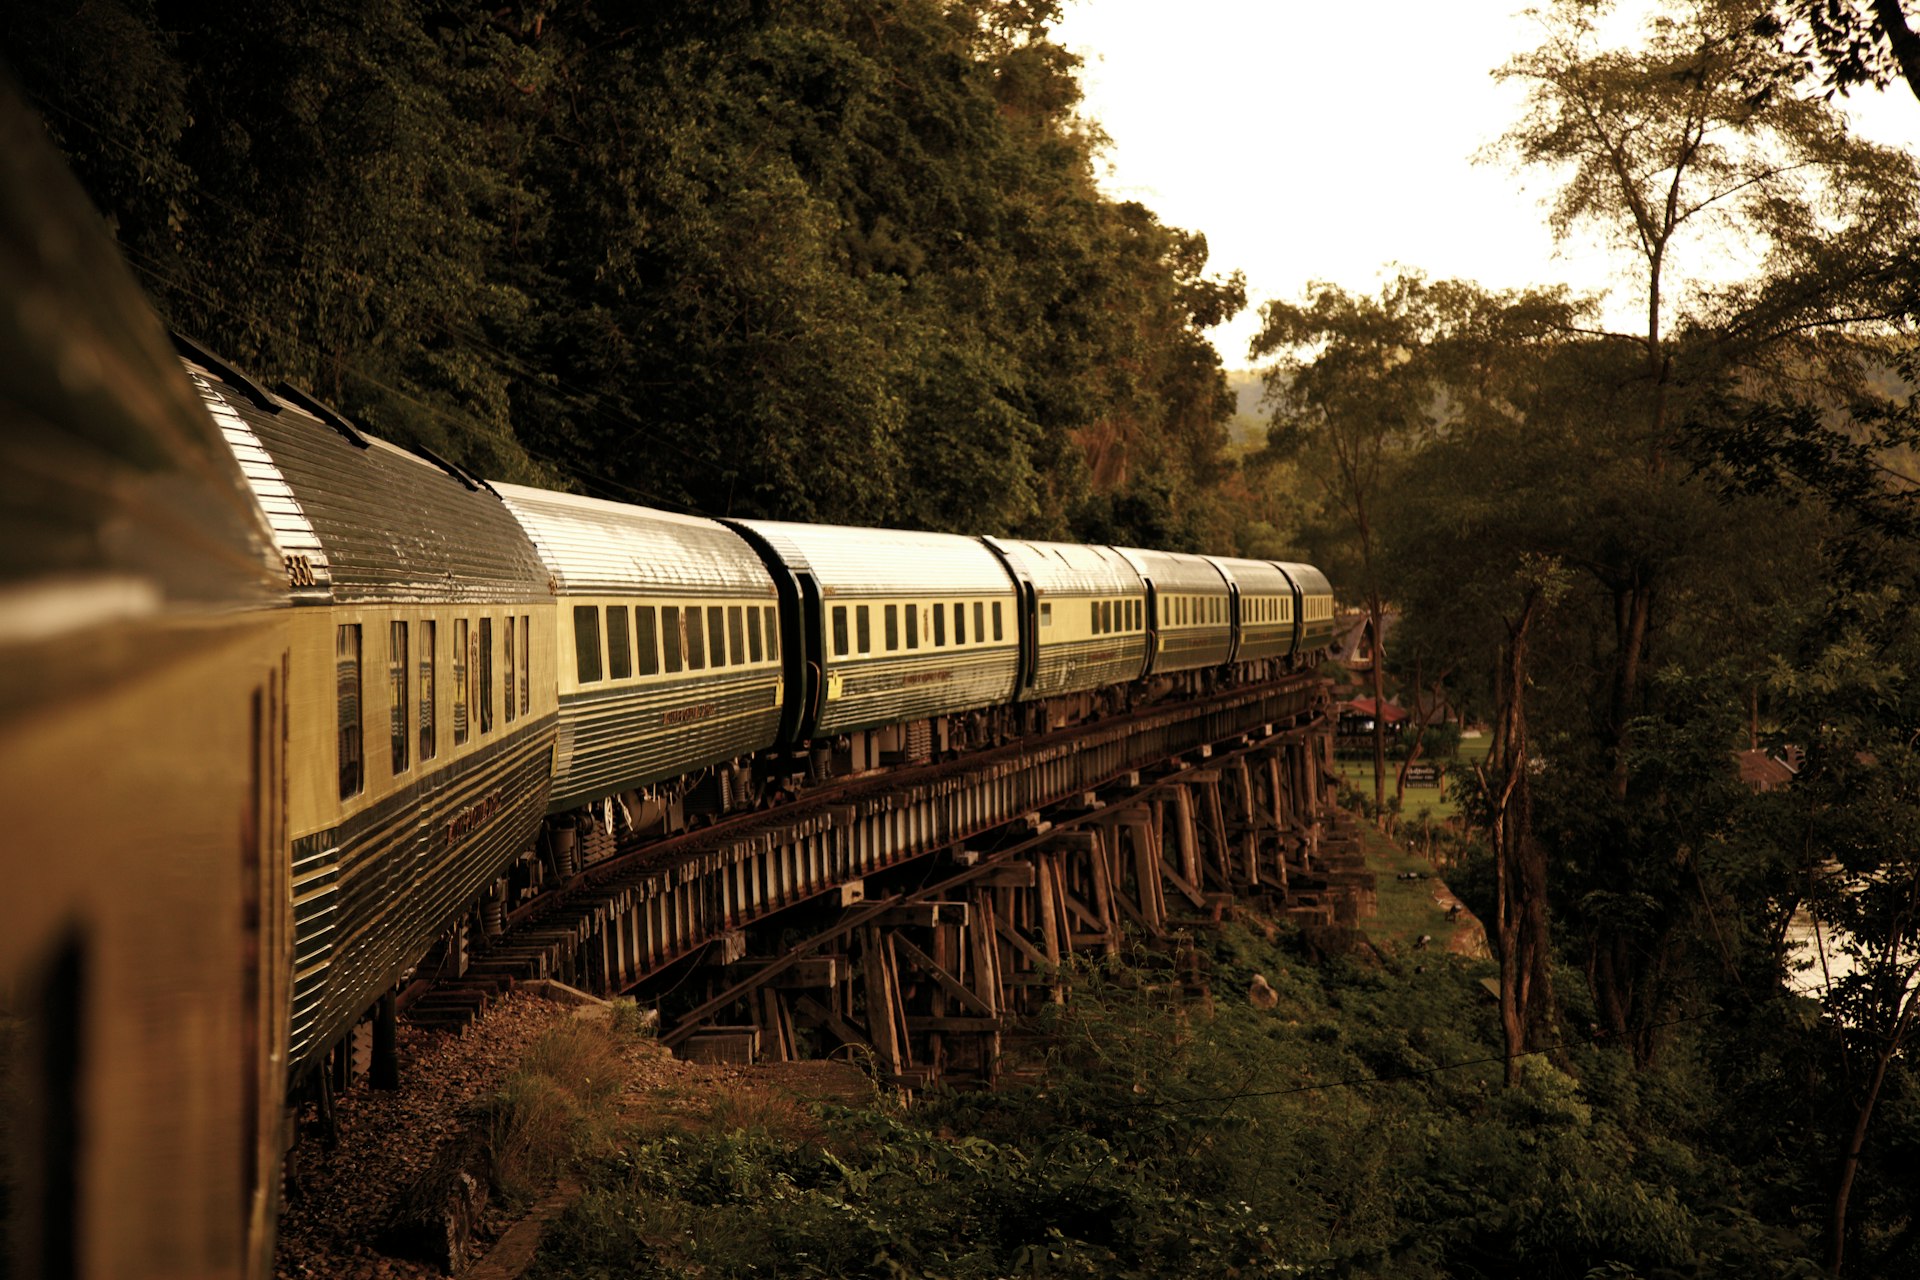 Train carriages moving over a raised section of track lined with thick vegetation